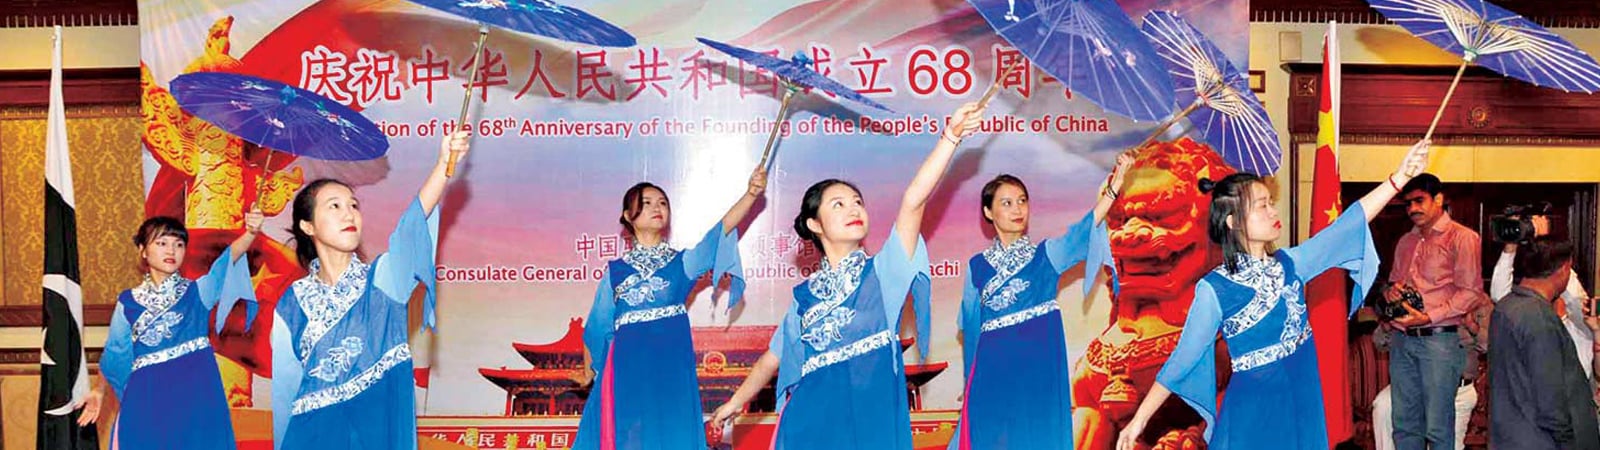 Cultural show on China Foundation Day anniversary